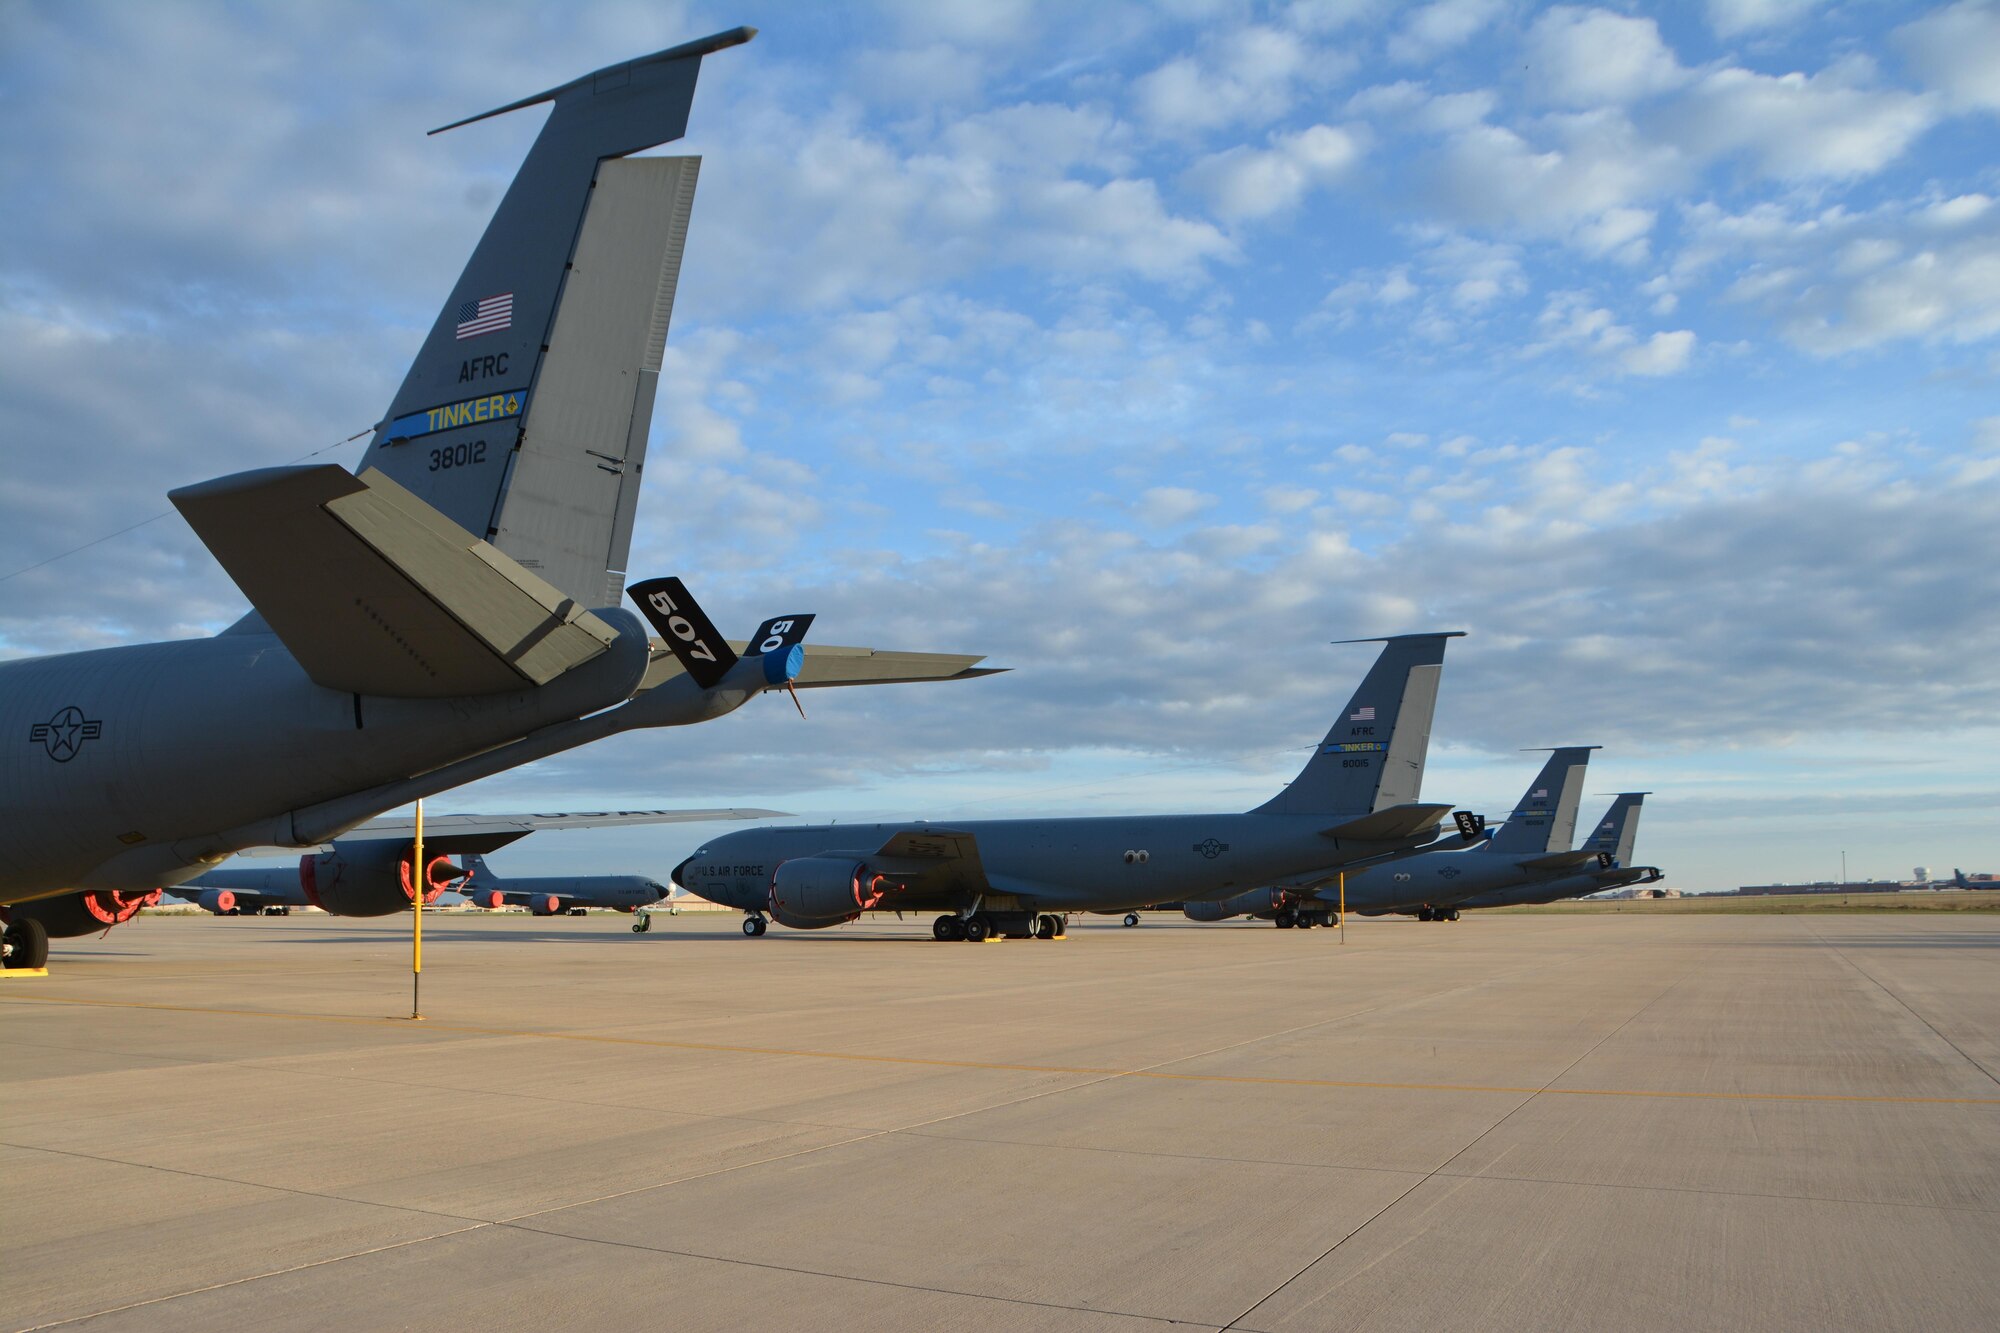 A row of KC-135 Stratotankers sit on the Reserve Ramp at Tinker Air Force Base, Oklahoma, Nov, 6, 2016. Citizen Airmen in the 507th Air Refueling Wing prepared these jets for alert air refueling support during exercise Global Thunder 17.  Exercise Global Thunder provides training opportunities for USSTRATCOM components, task forces, units and command posts to deter and, if necessary, defeat a military attack against the United States and to employ forces as directed by the President. (U.S. Air Force photo /Tech. Sgt. Charles Taylor/Released) 